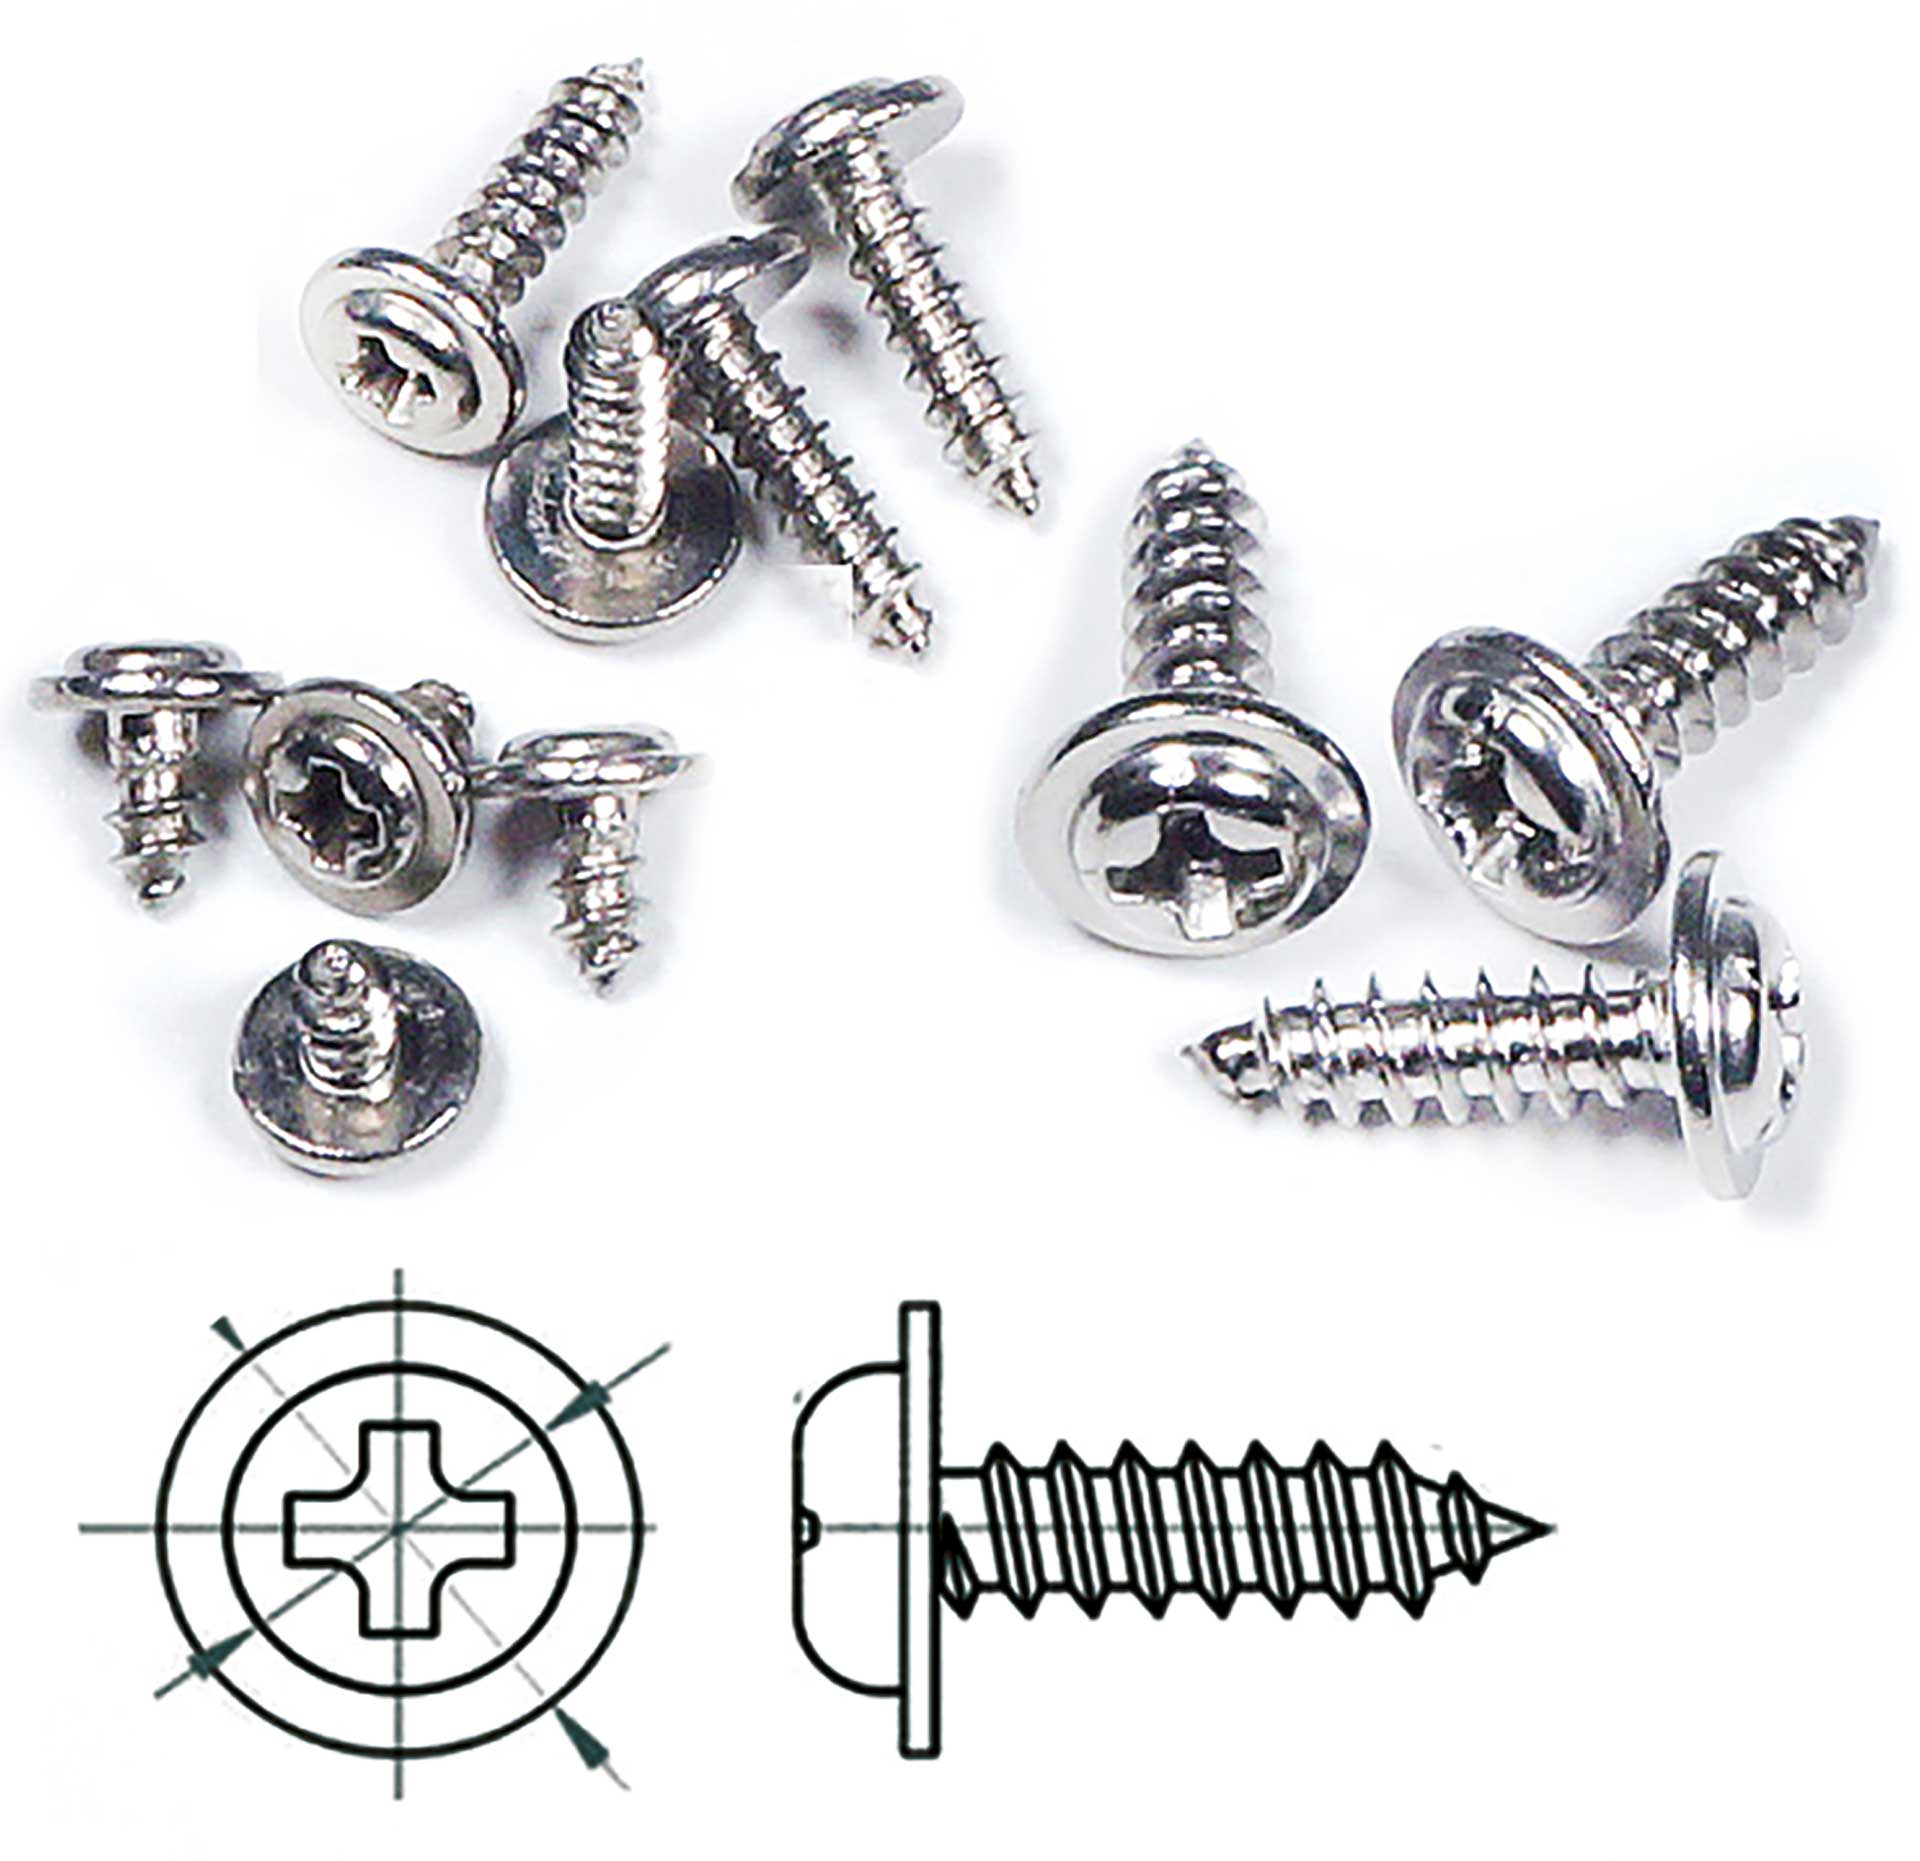 Robbe Modellsport Tapping screws with collar Phillips head 2,6x10mm 30pcs. stainless steel